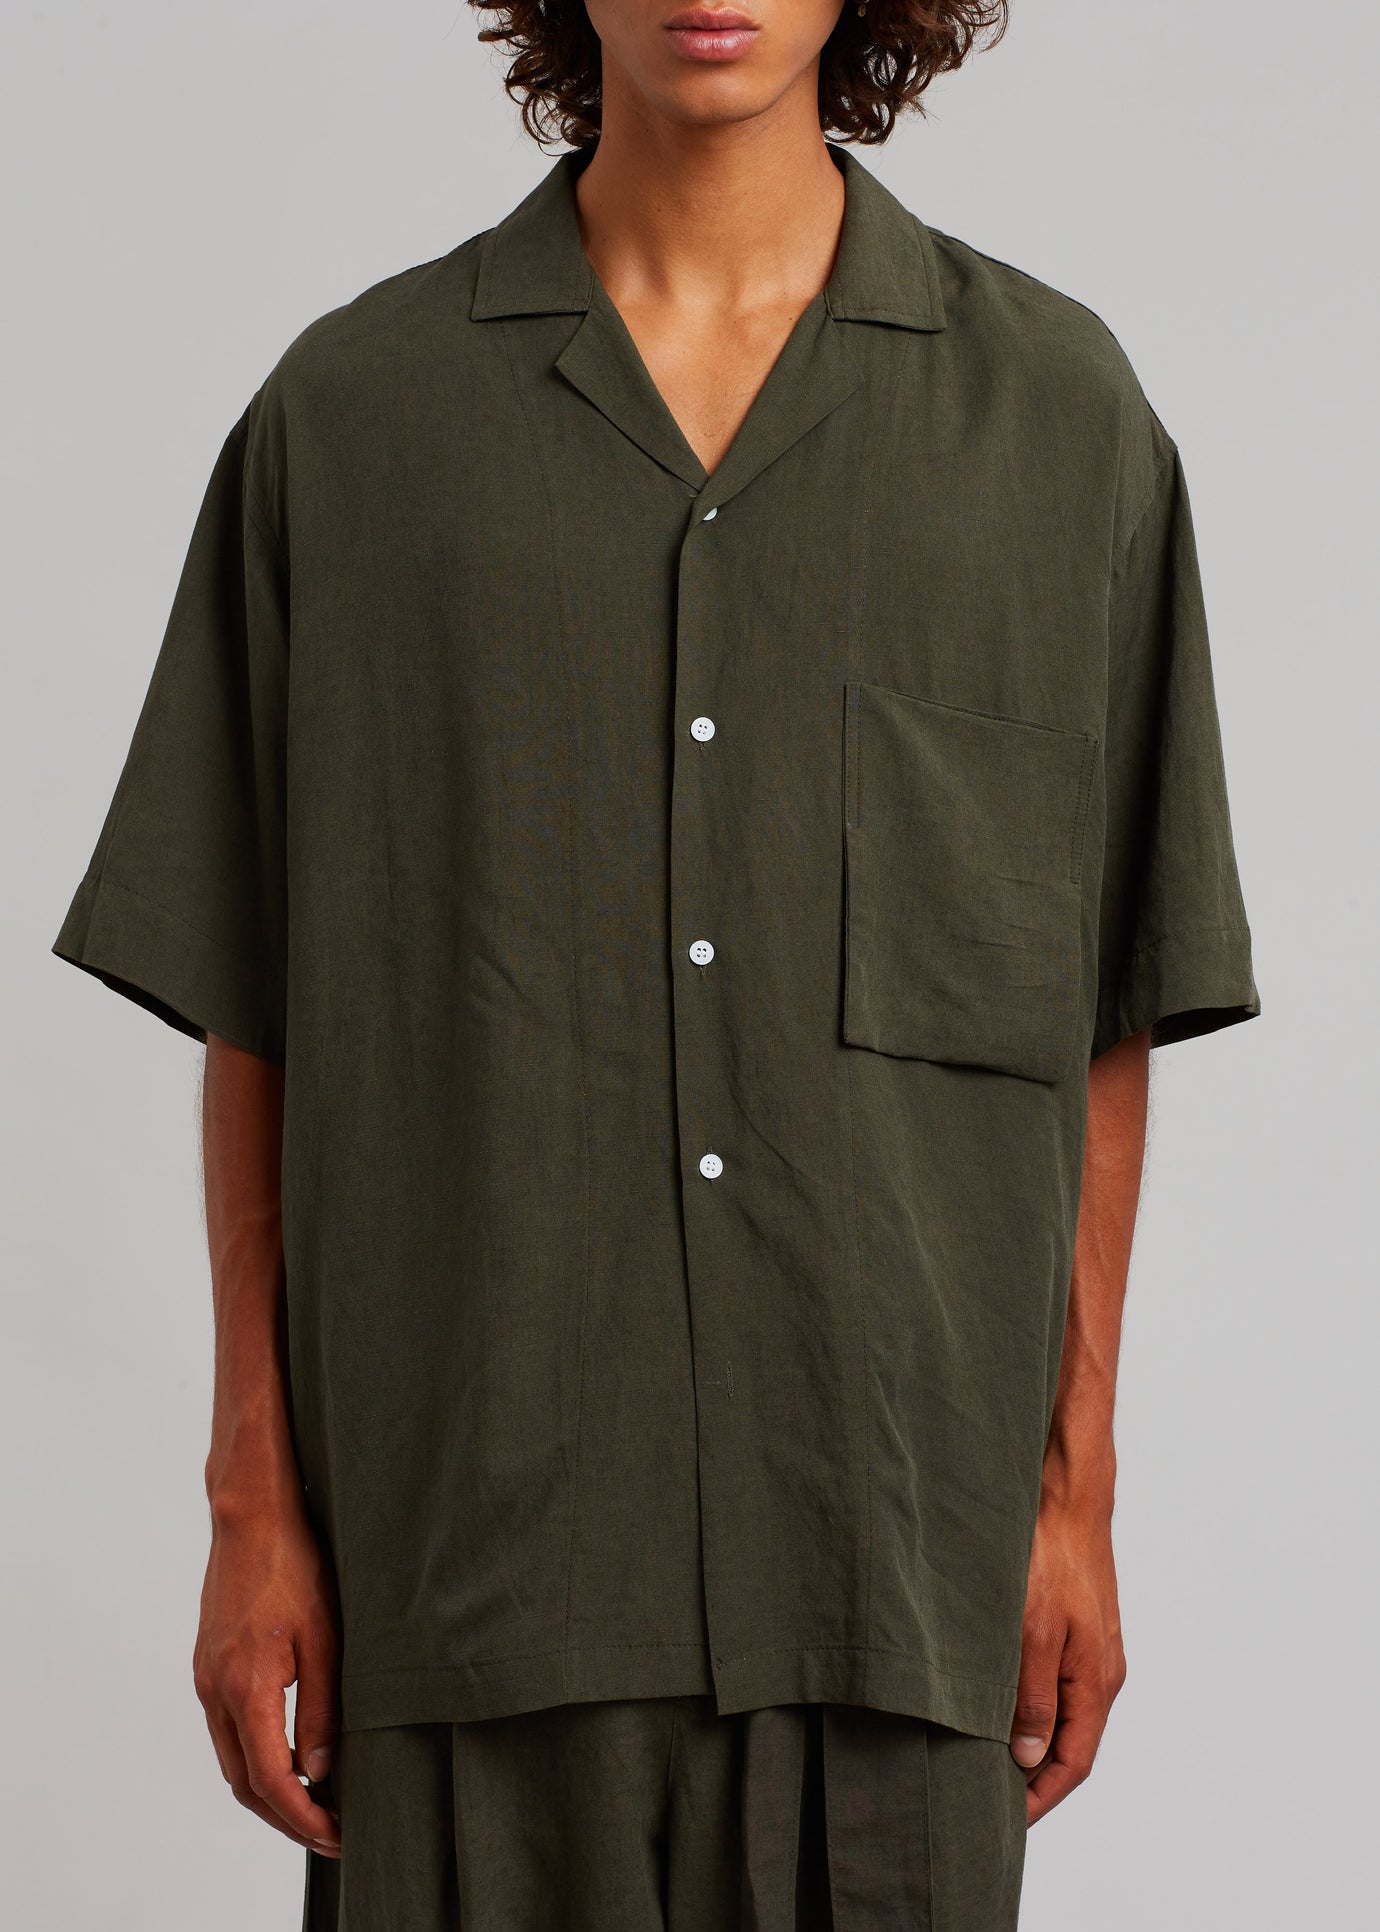 Georg Puch Shirt - Olive - 1